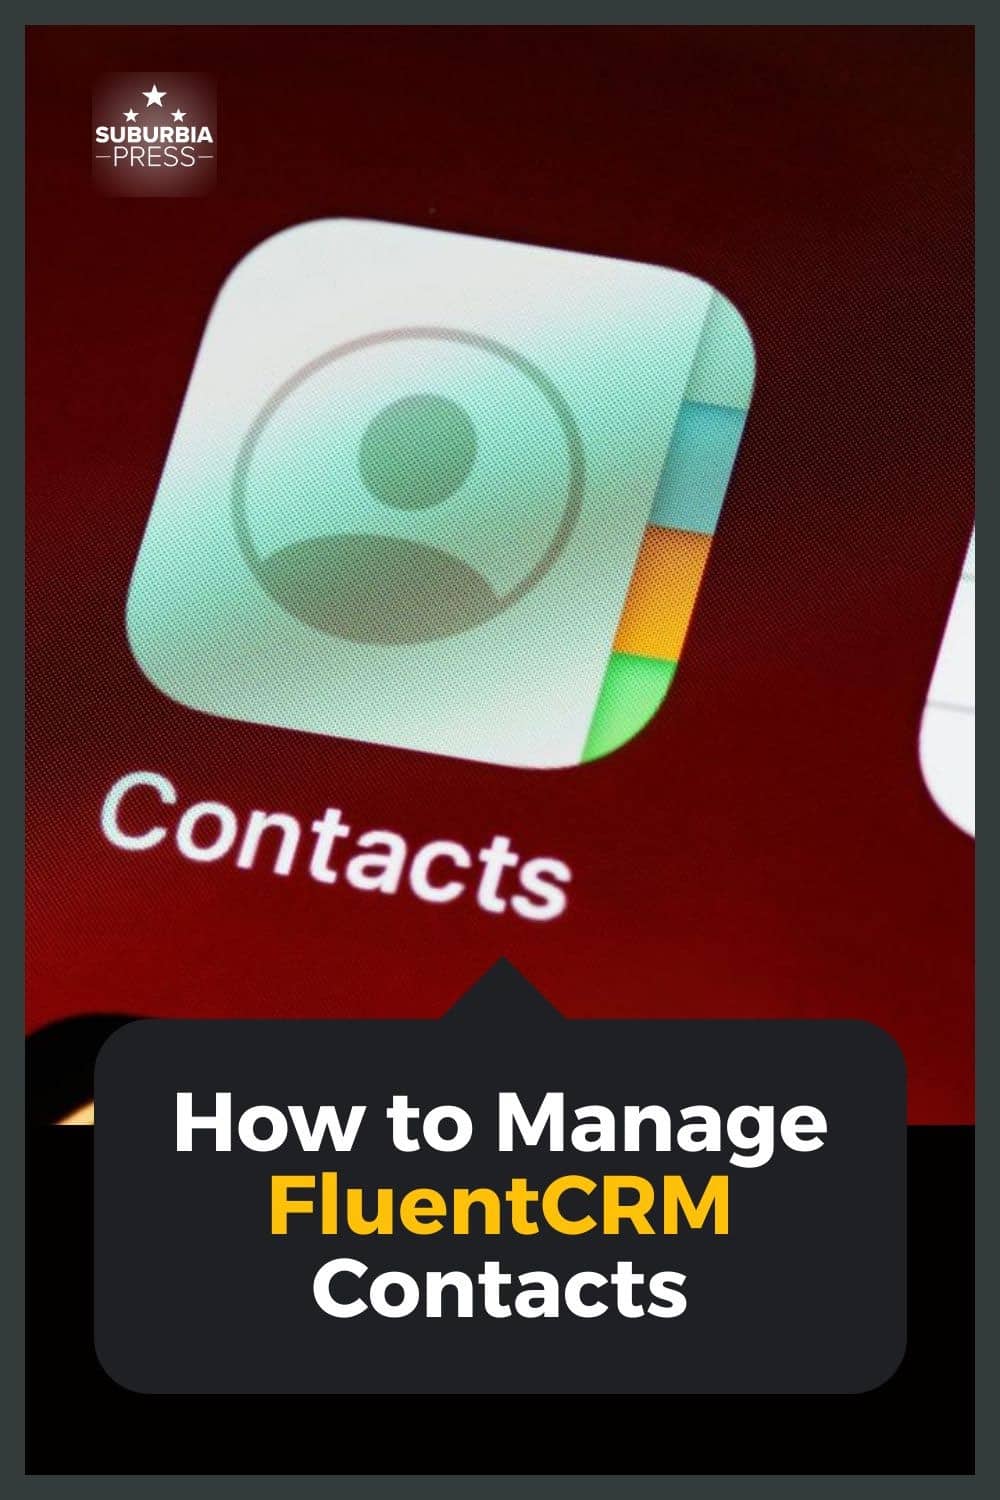 How to Manage FluentCRM Contacts